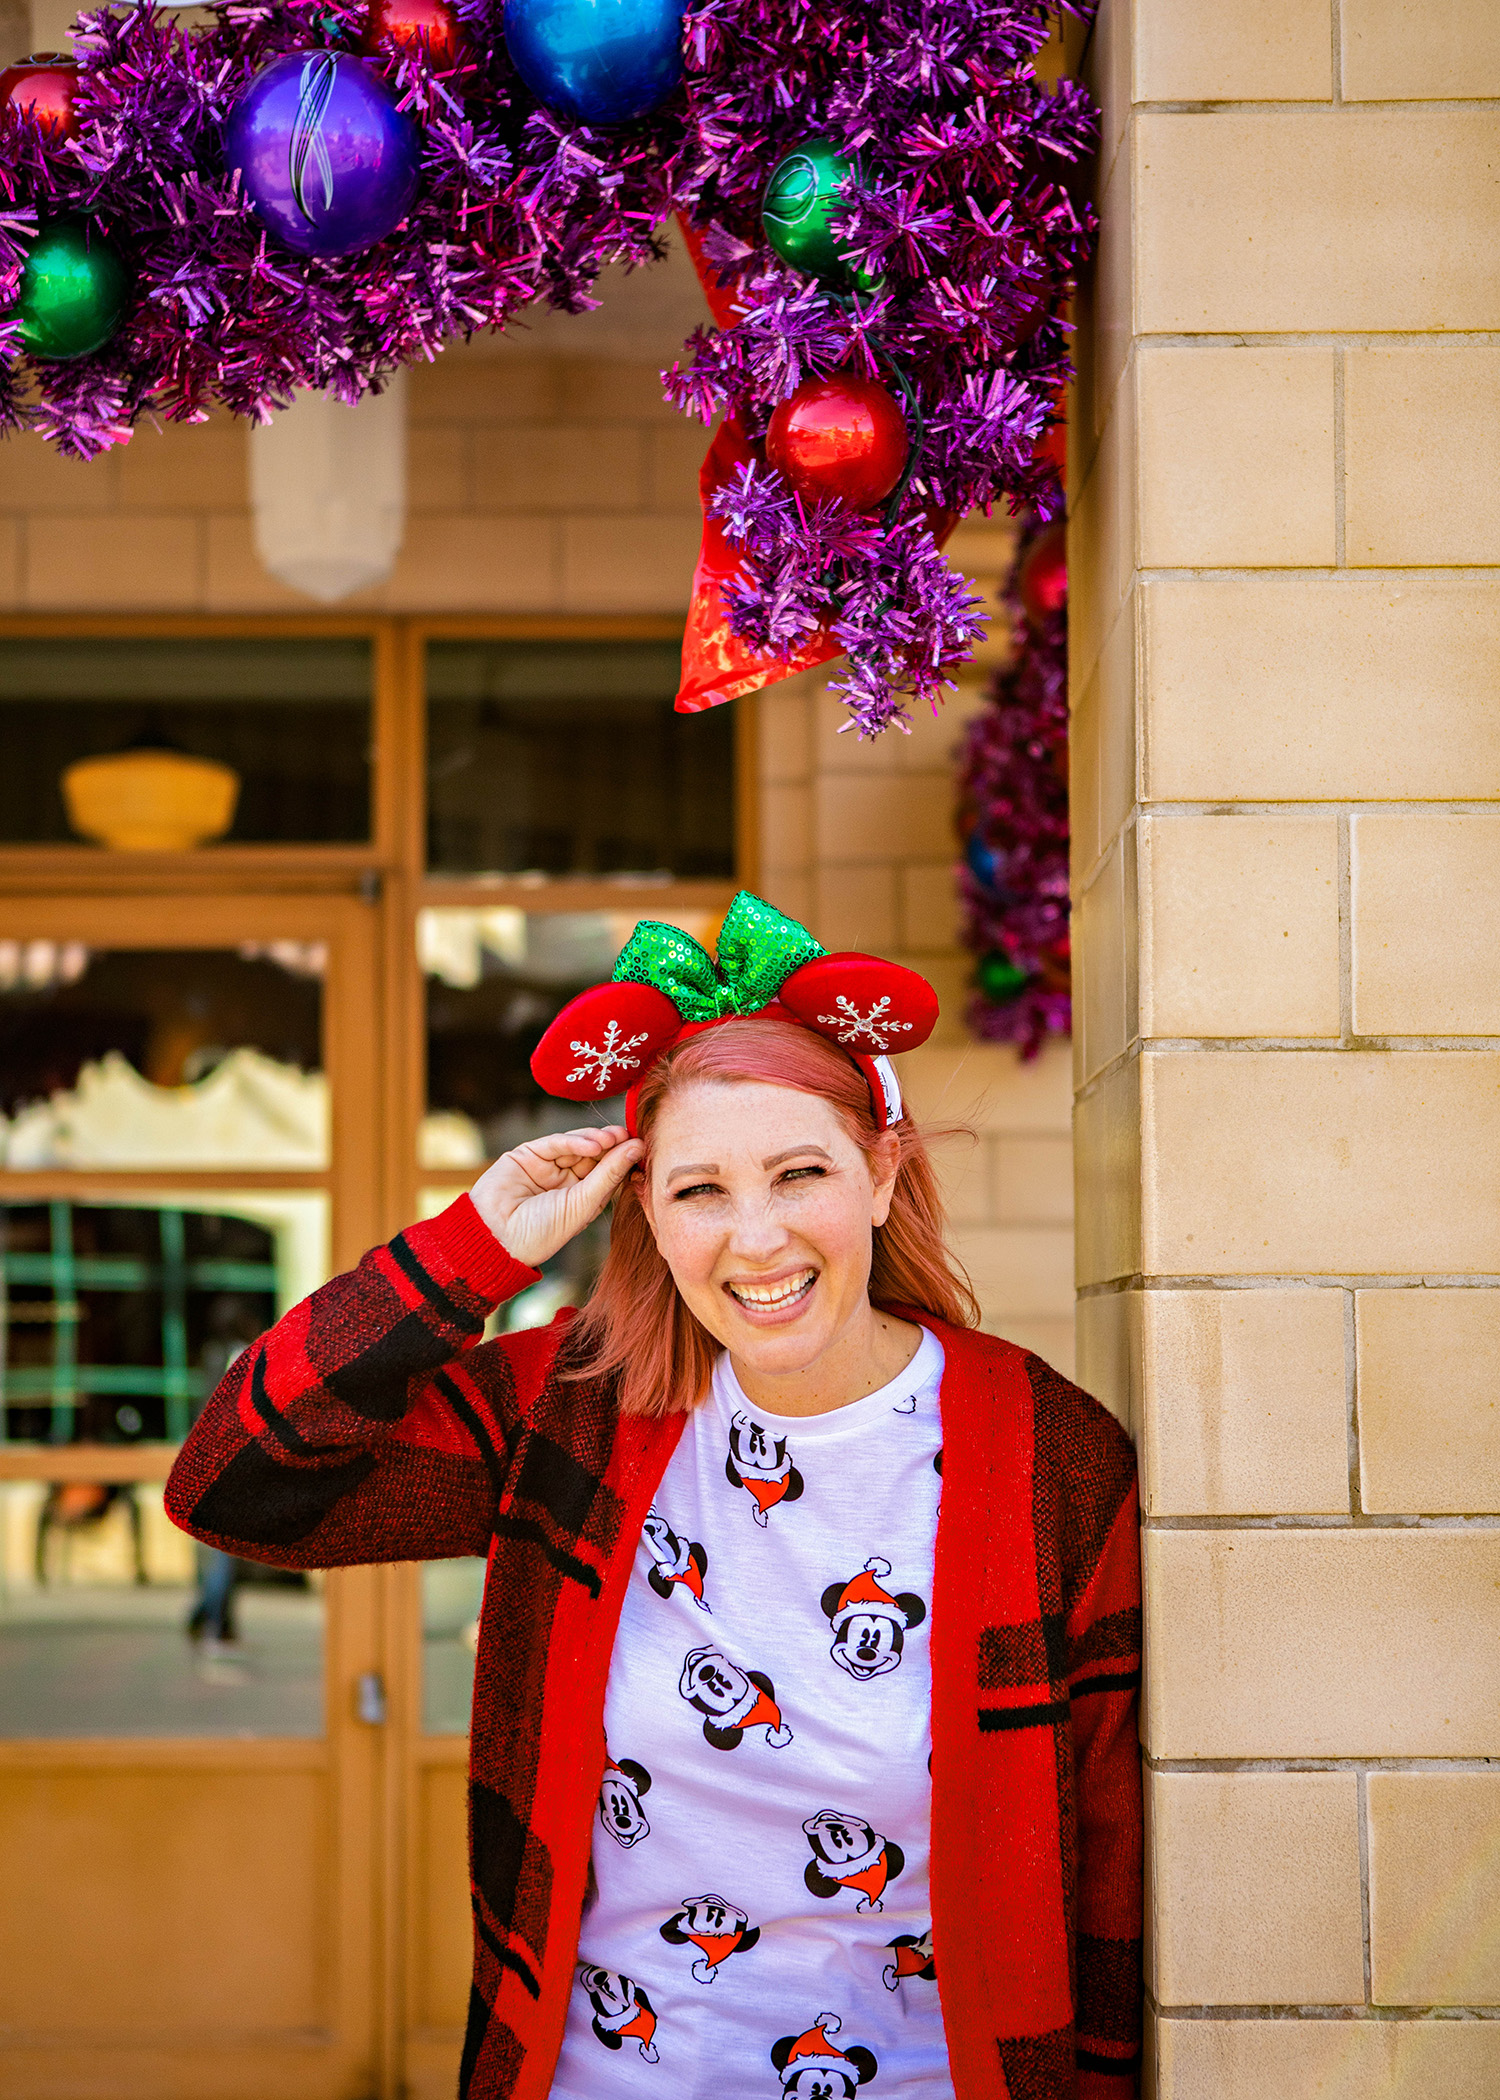 Looking for fun Disneyland outfits? This Mickey Christmas Tee is PERFECT for Disneyland Christmas trips!